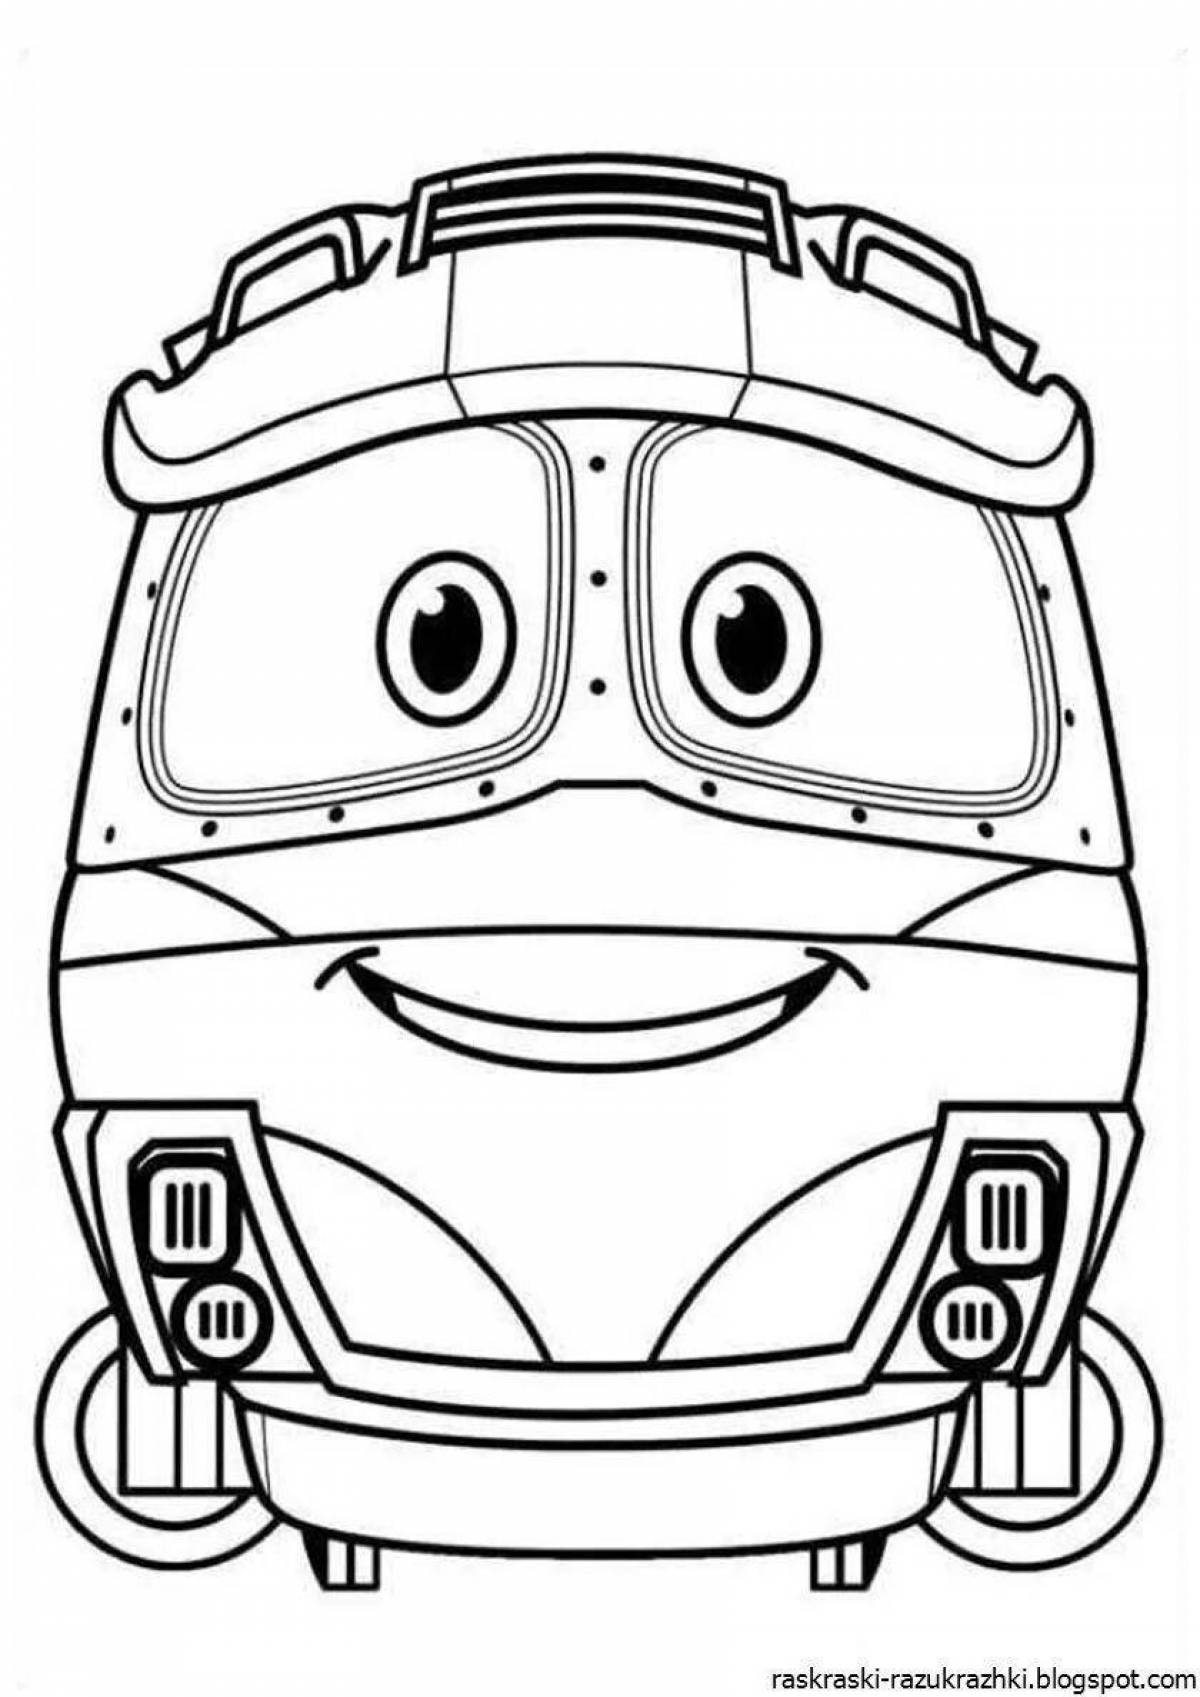 Exciting robot train coloring page